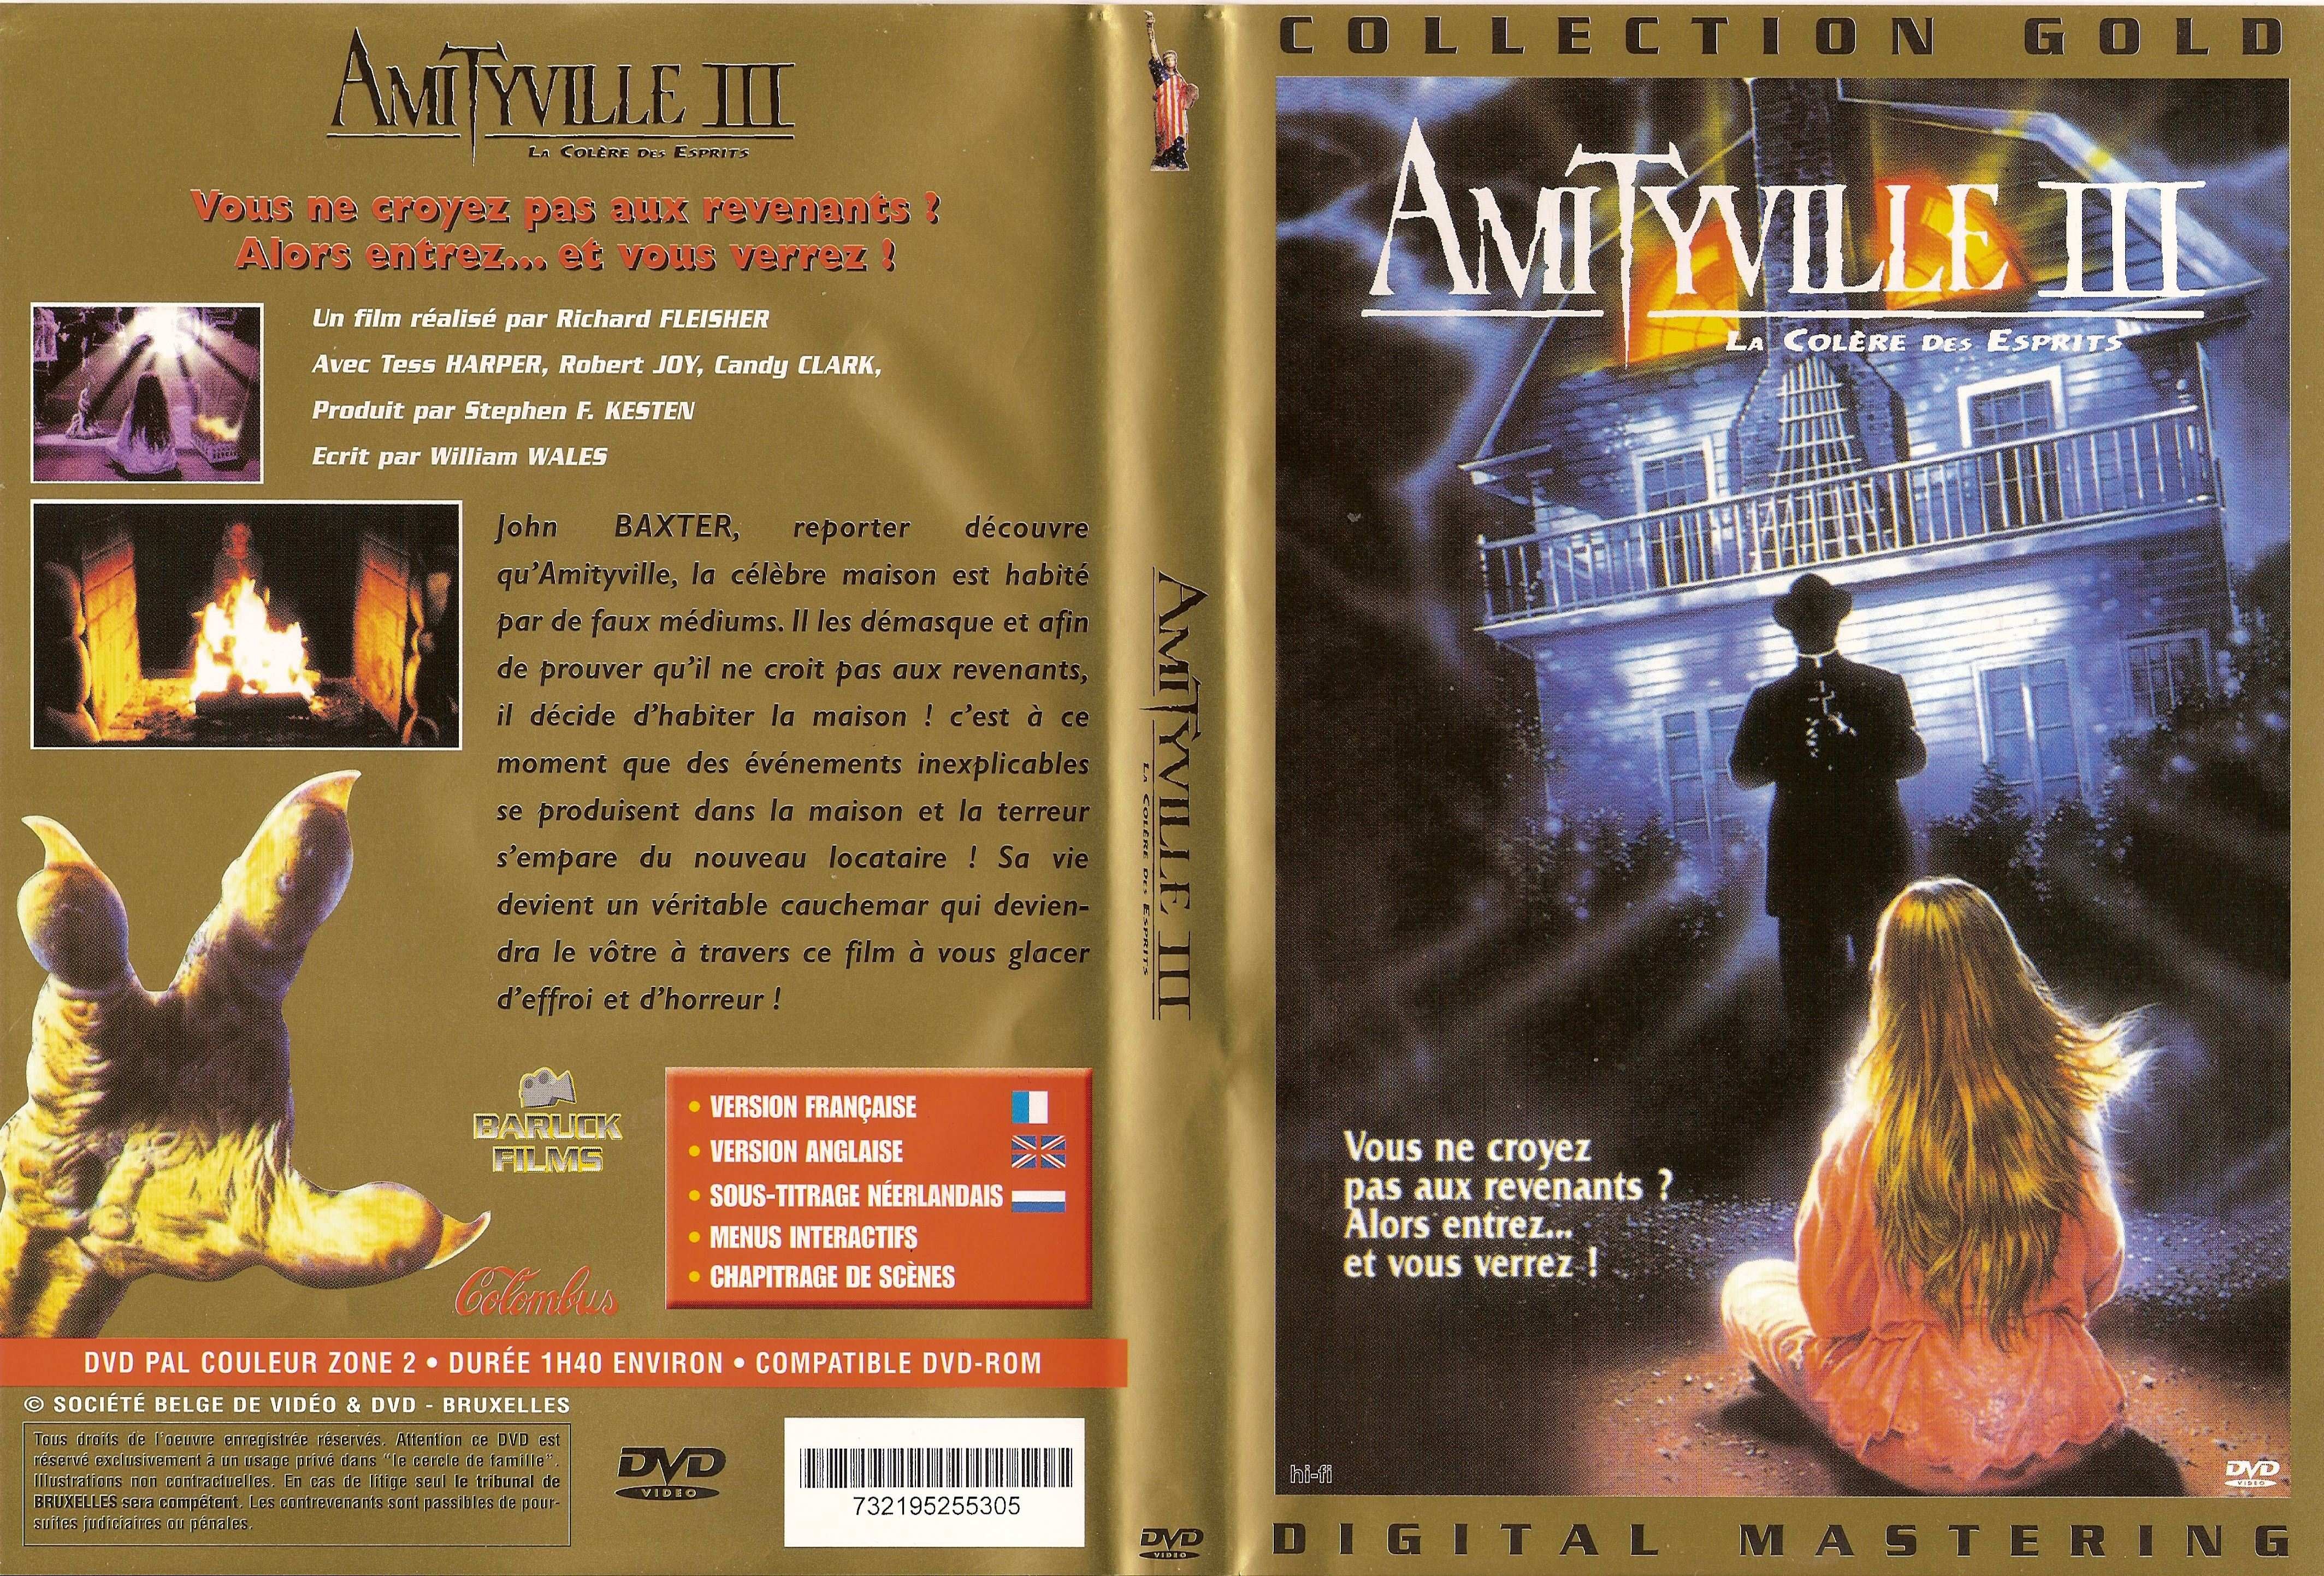 Jaquette DVD Amityville 3